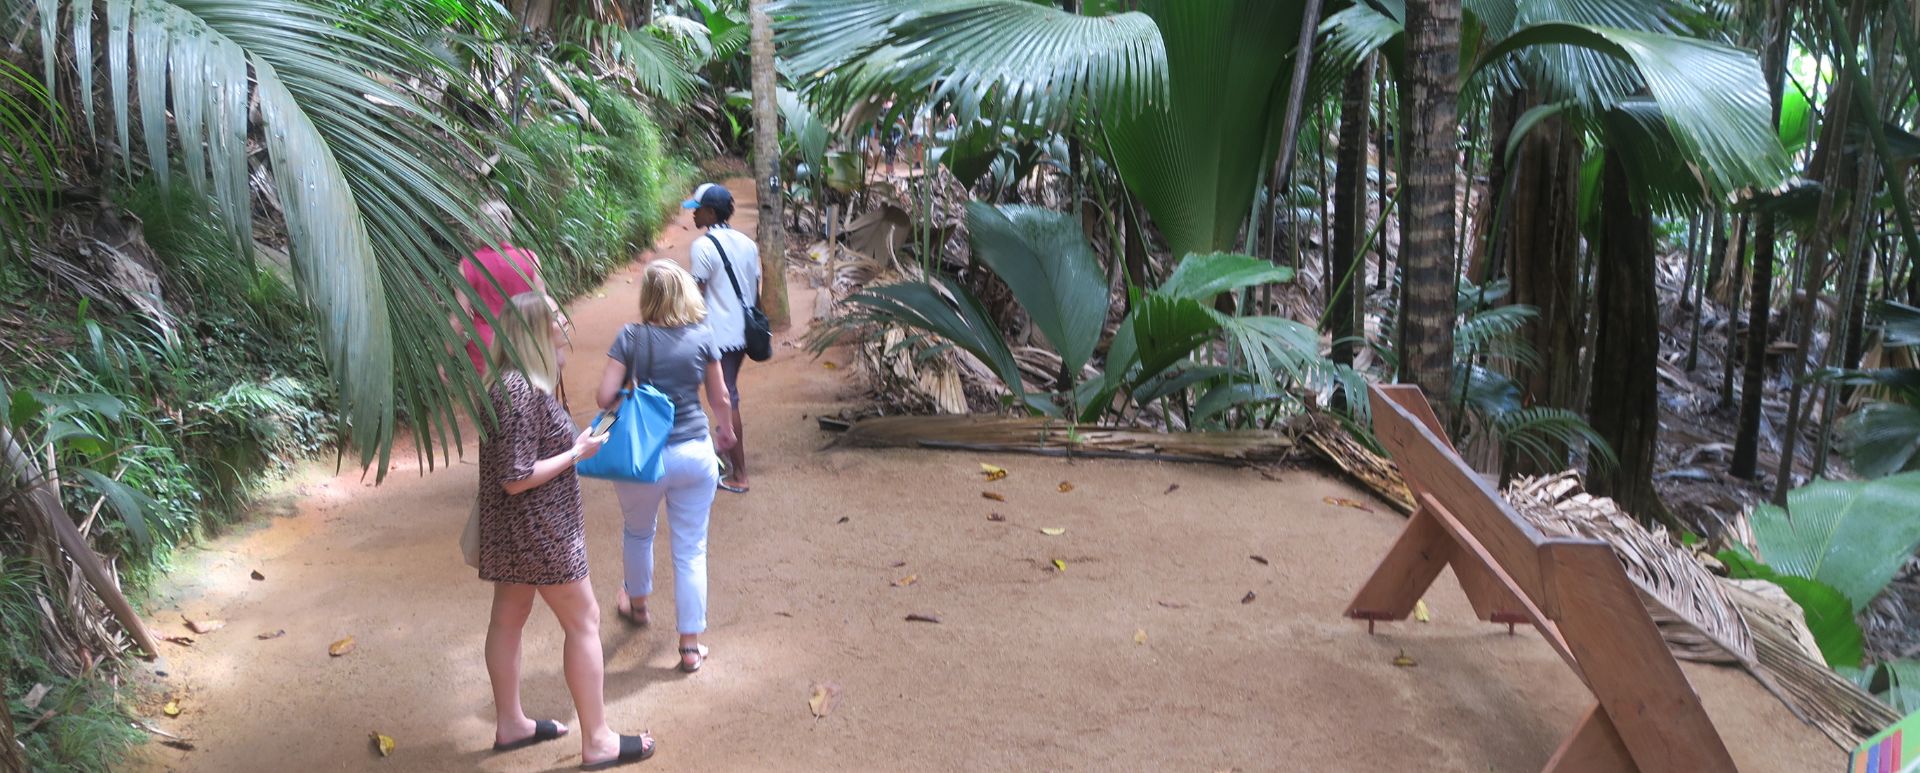 Things to do in the Seychelles, walk the Vallee de Mai